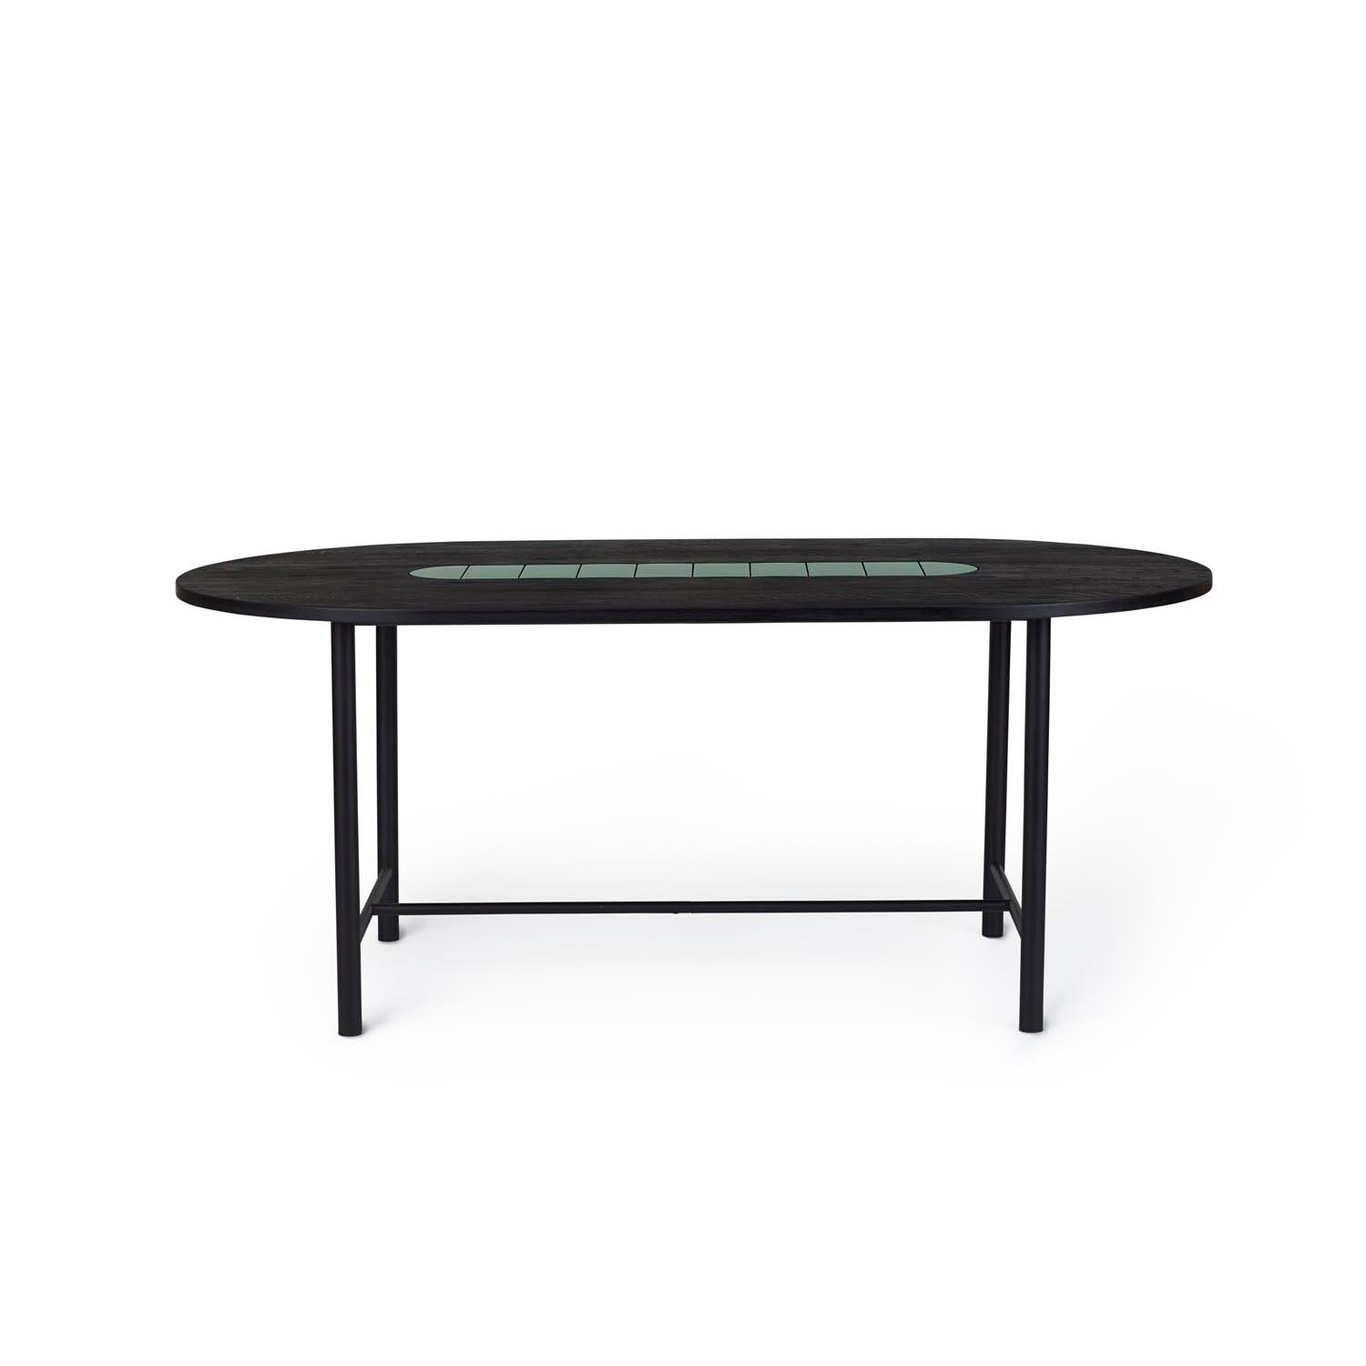 Be My Guest Dining Table 180 cm, Black Oiled Oak / Forest Green